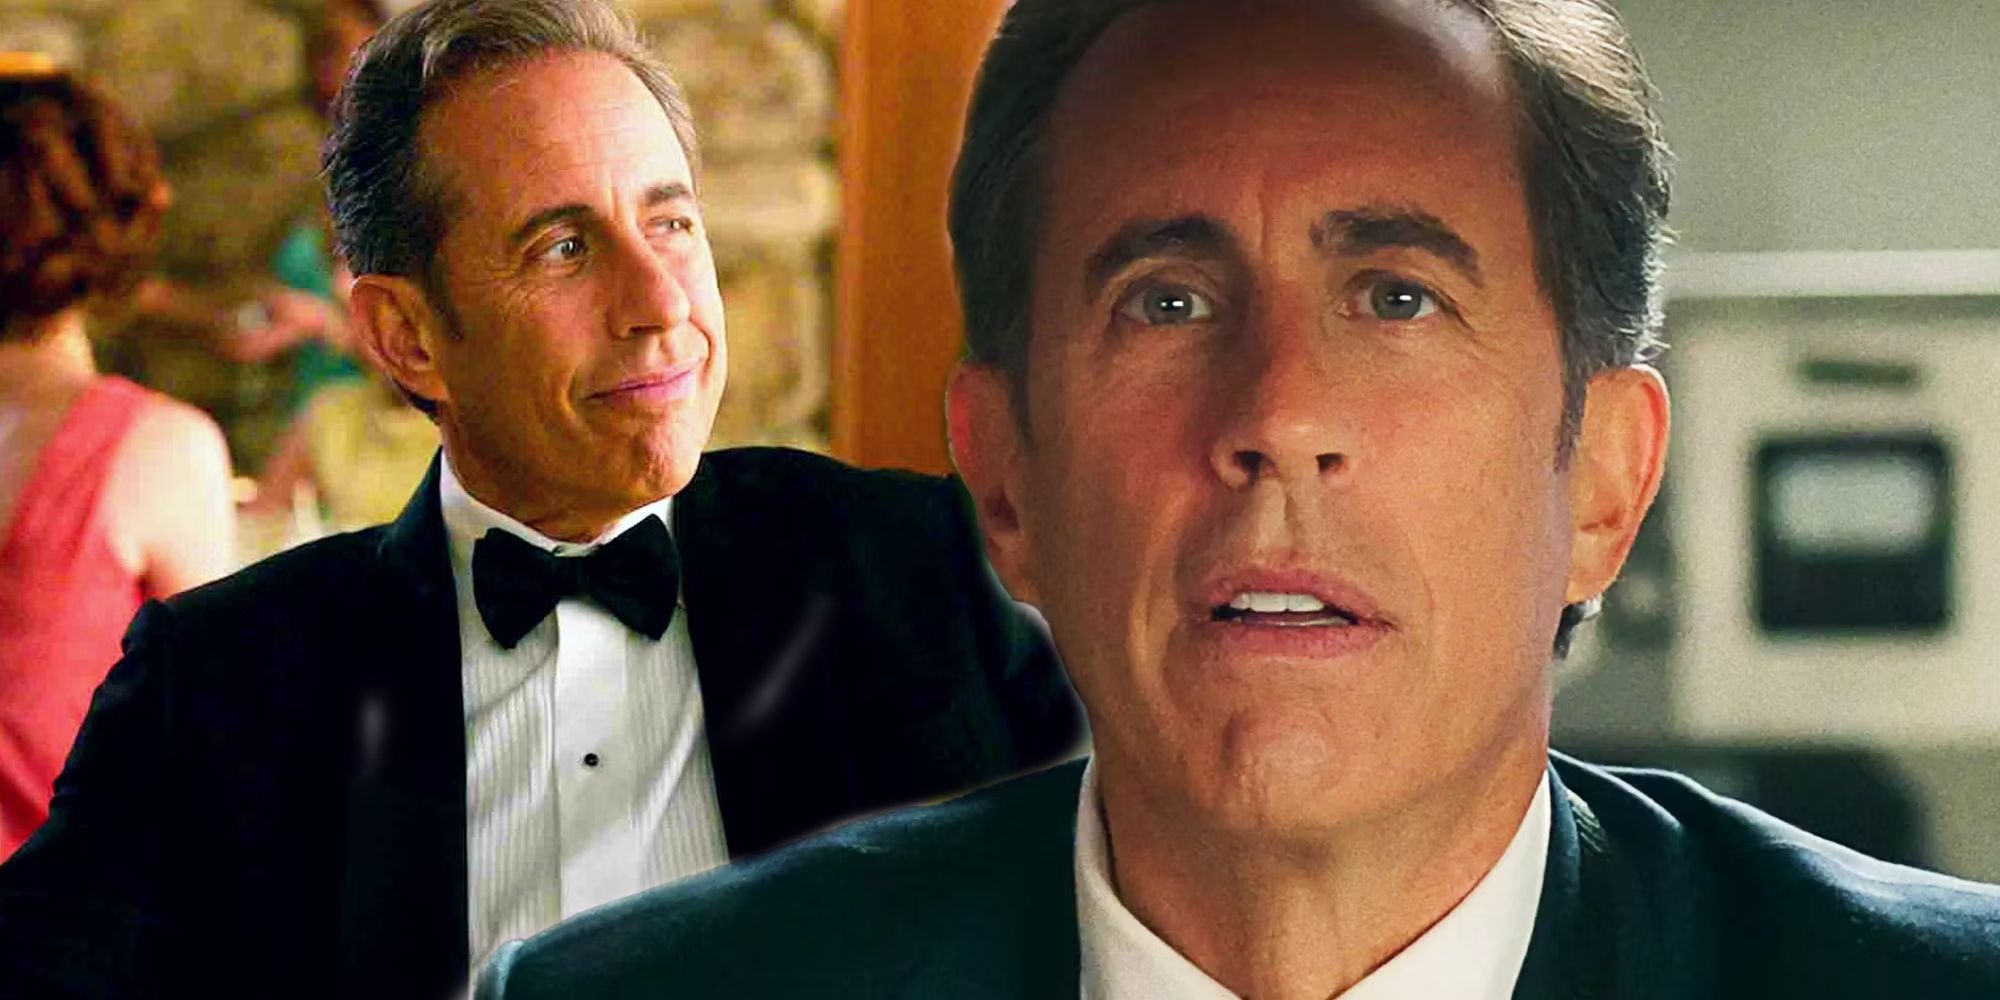 Jerry Seinfeld wearing a tux smiling next to Seinfeld looking ahead in Unfrosted